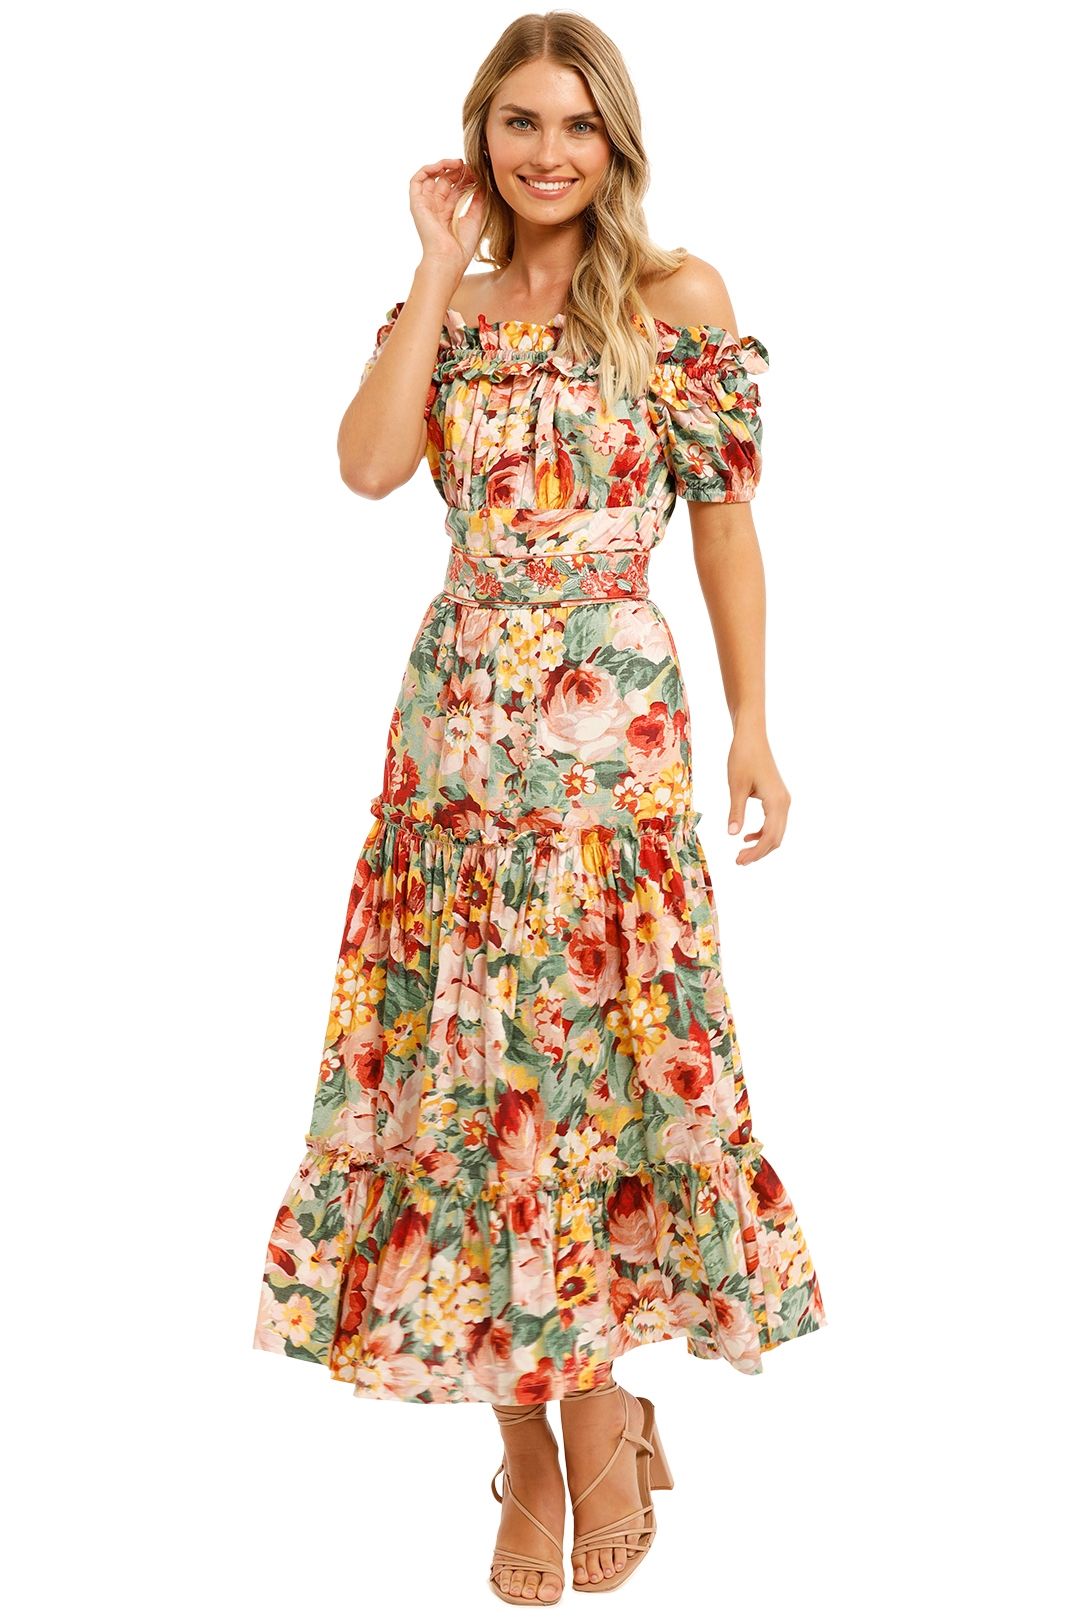 Ministry of Style Into The Garden Midi Dress